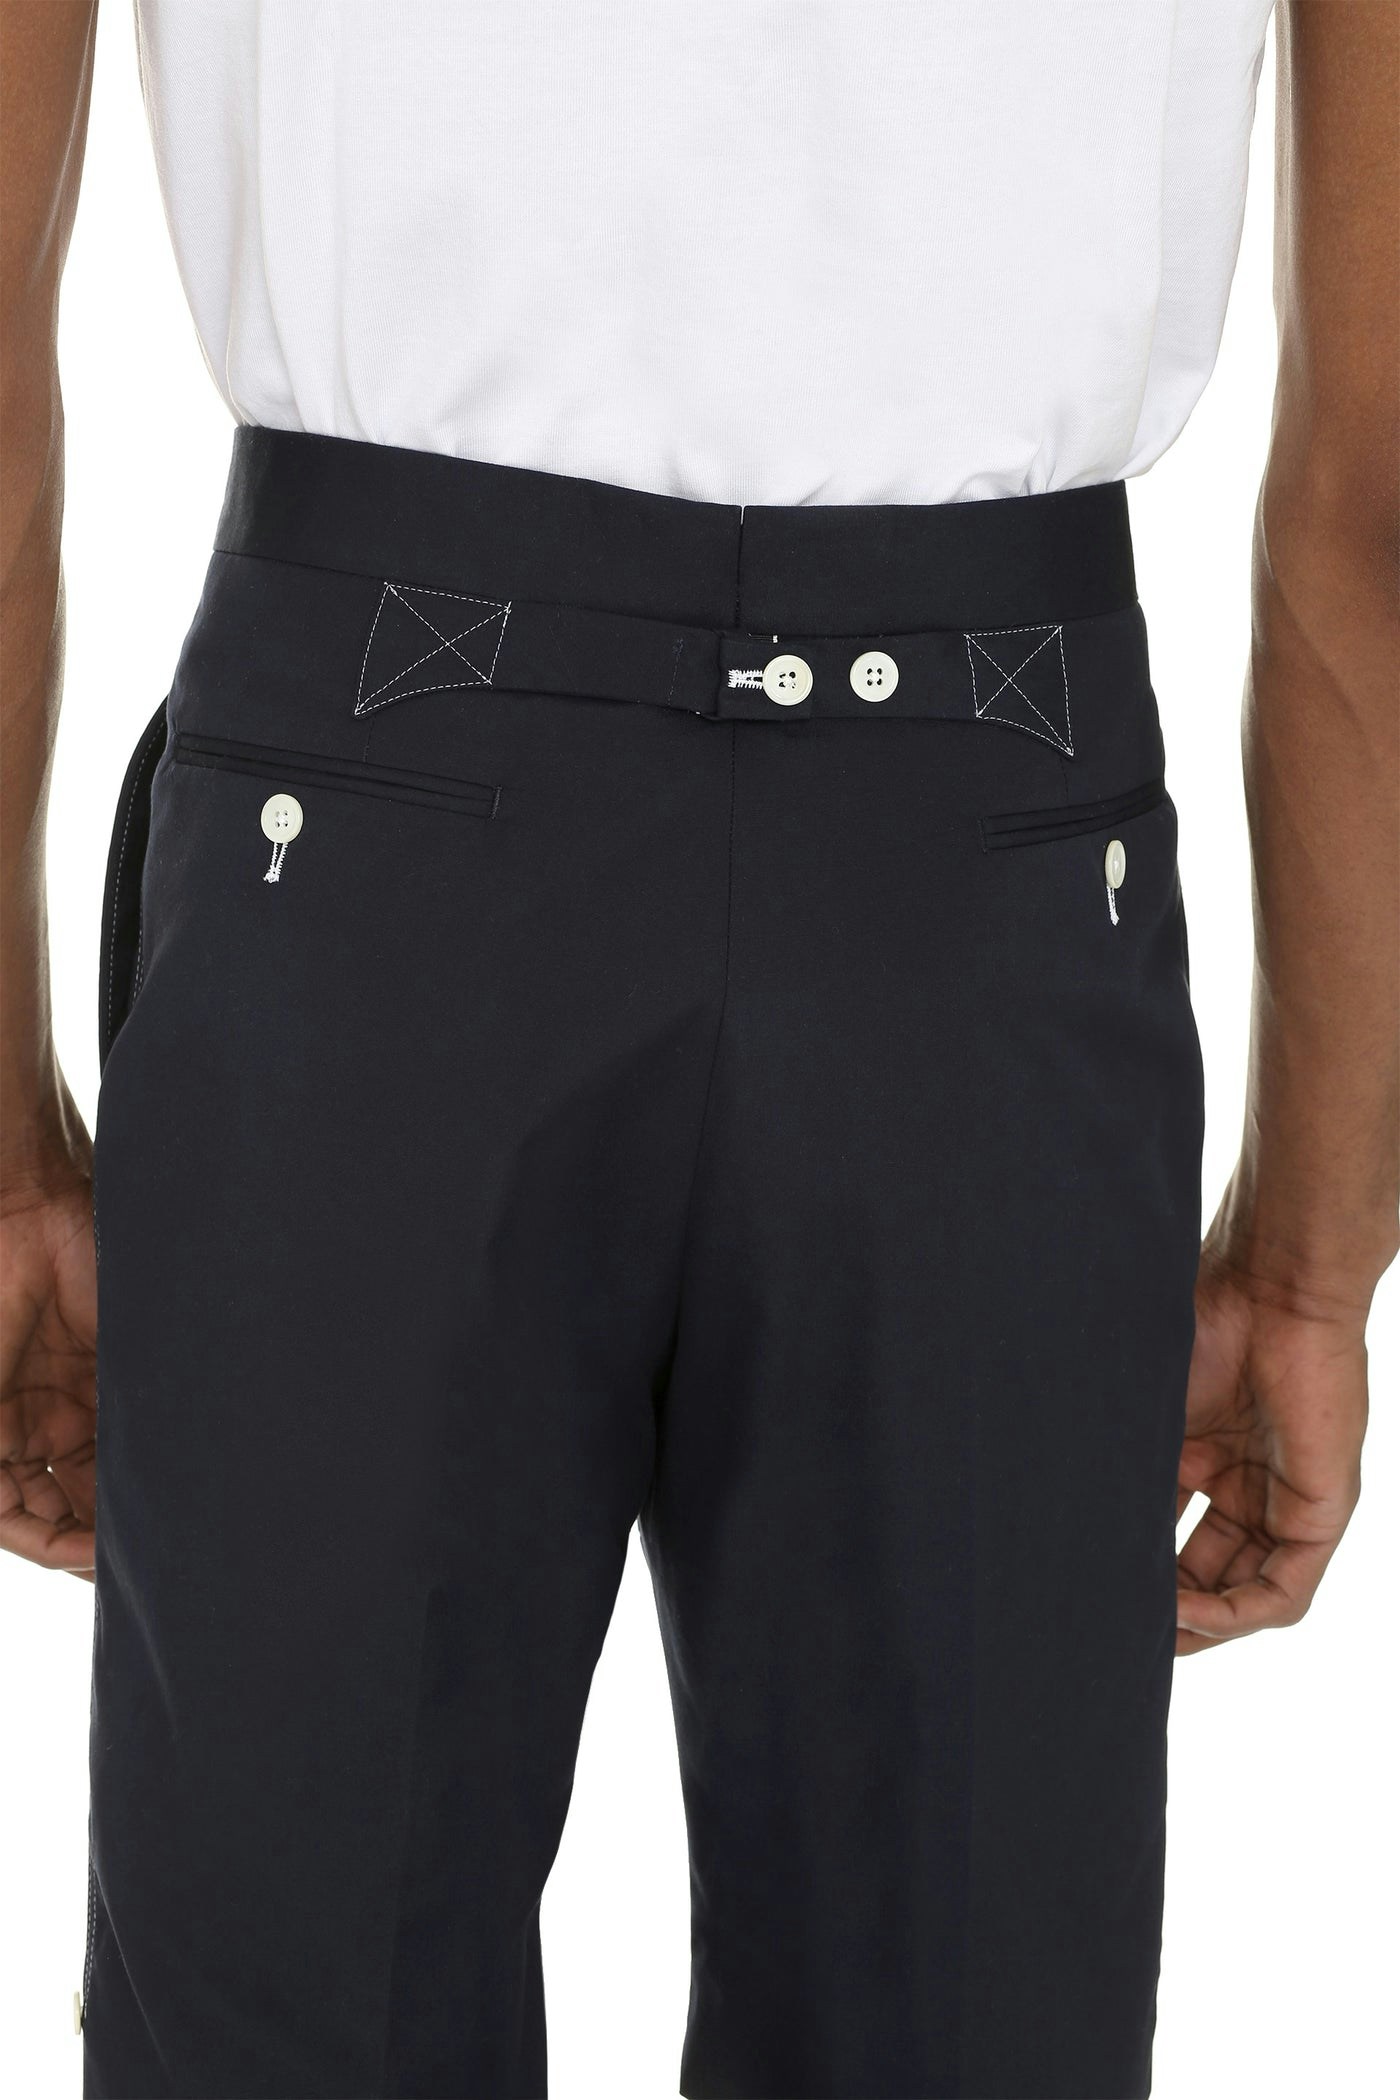 415 THOM BROWNE SHORT CHINO TROUSERS